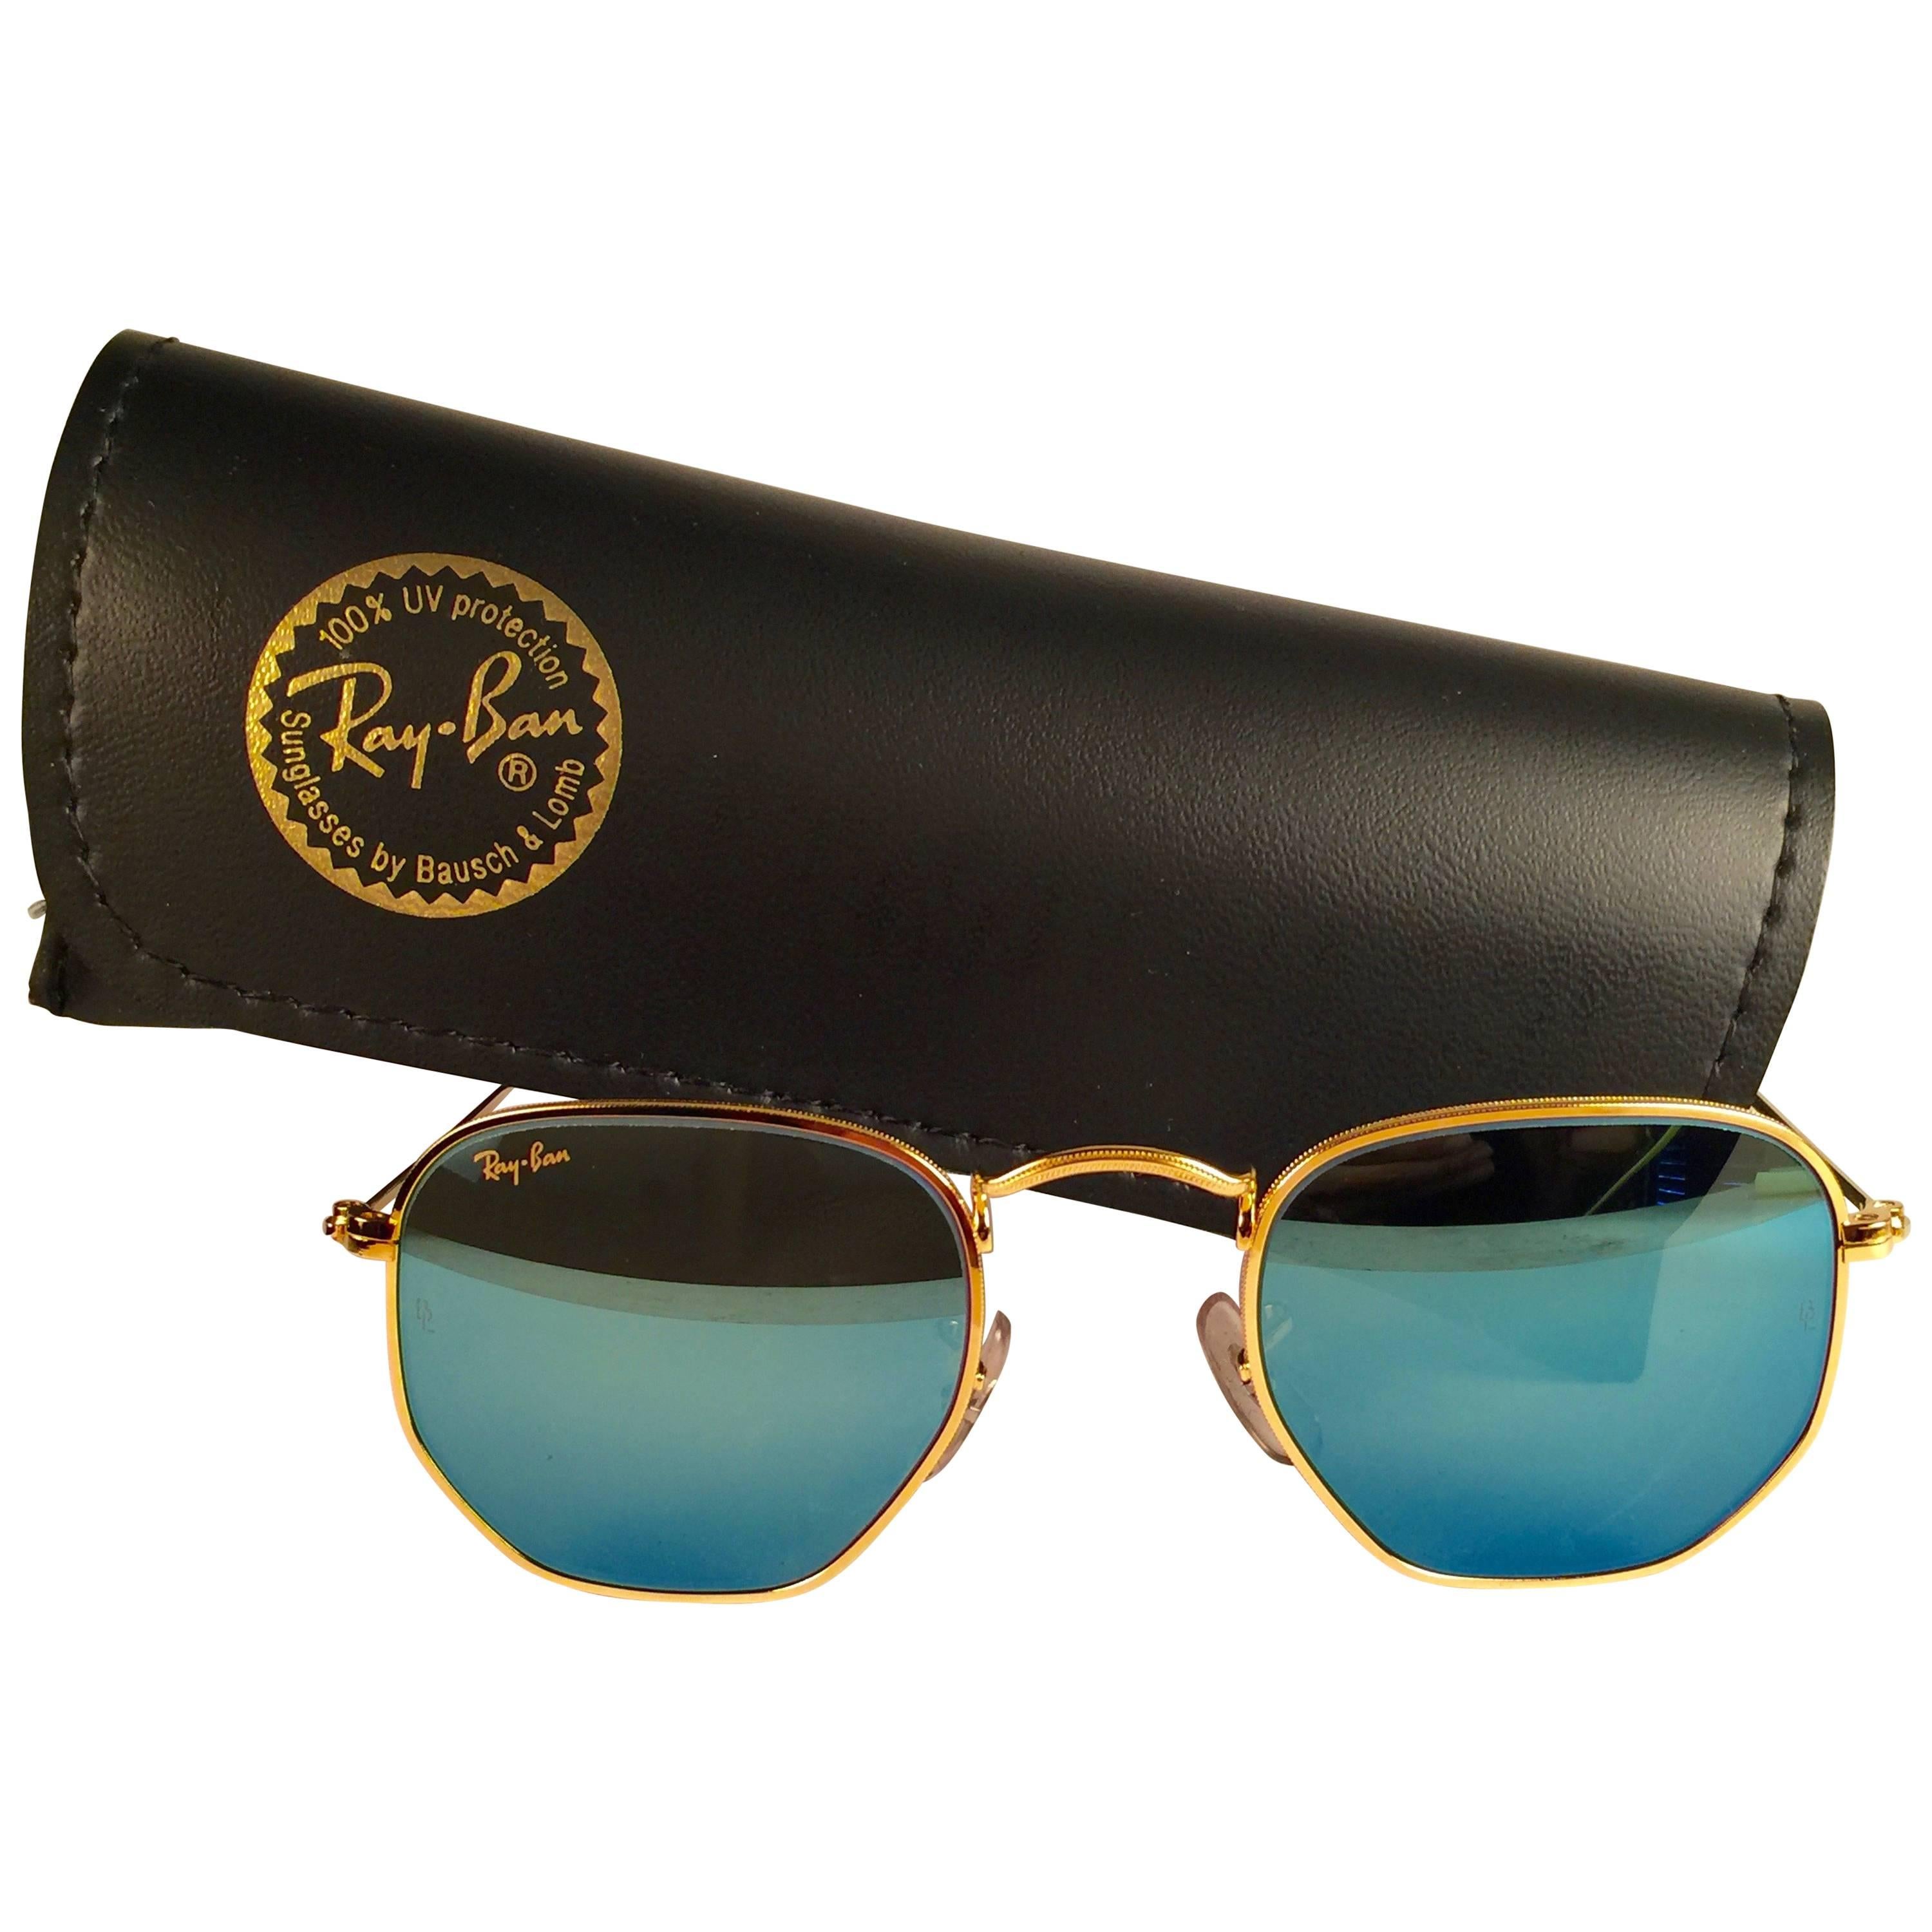 New Vintage Ray Ban Style 3 Blue Mirror Lenses 1990's B&L Sunglasses